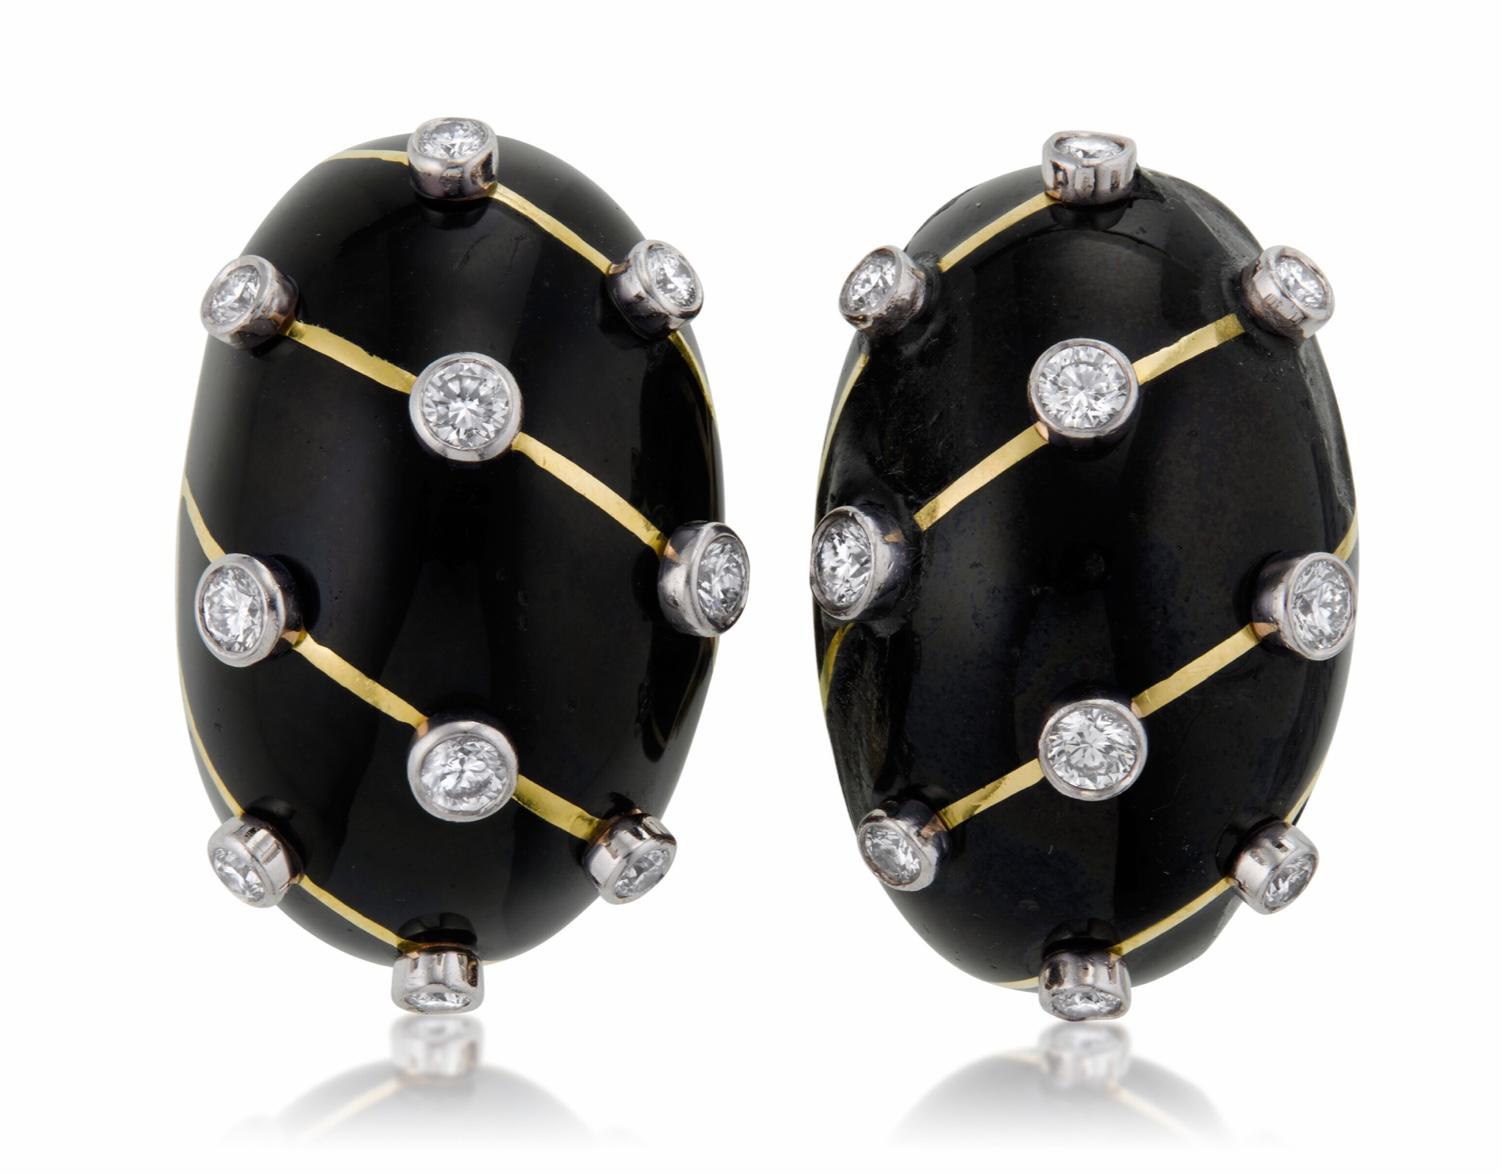 Tiffany & Co. Jean Schlumberger Diamond and Black Enamel Earrings.
This pair of earrings has 20 round with approximate total weight of 1.00 - 1.10 carats, black enamel, 18k yellow gold and platinum, signed Tiffany & Co., Schlumberger Std.,